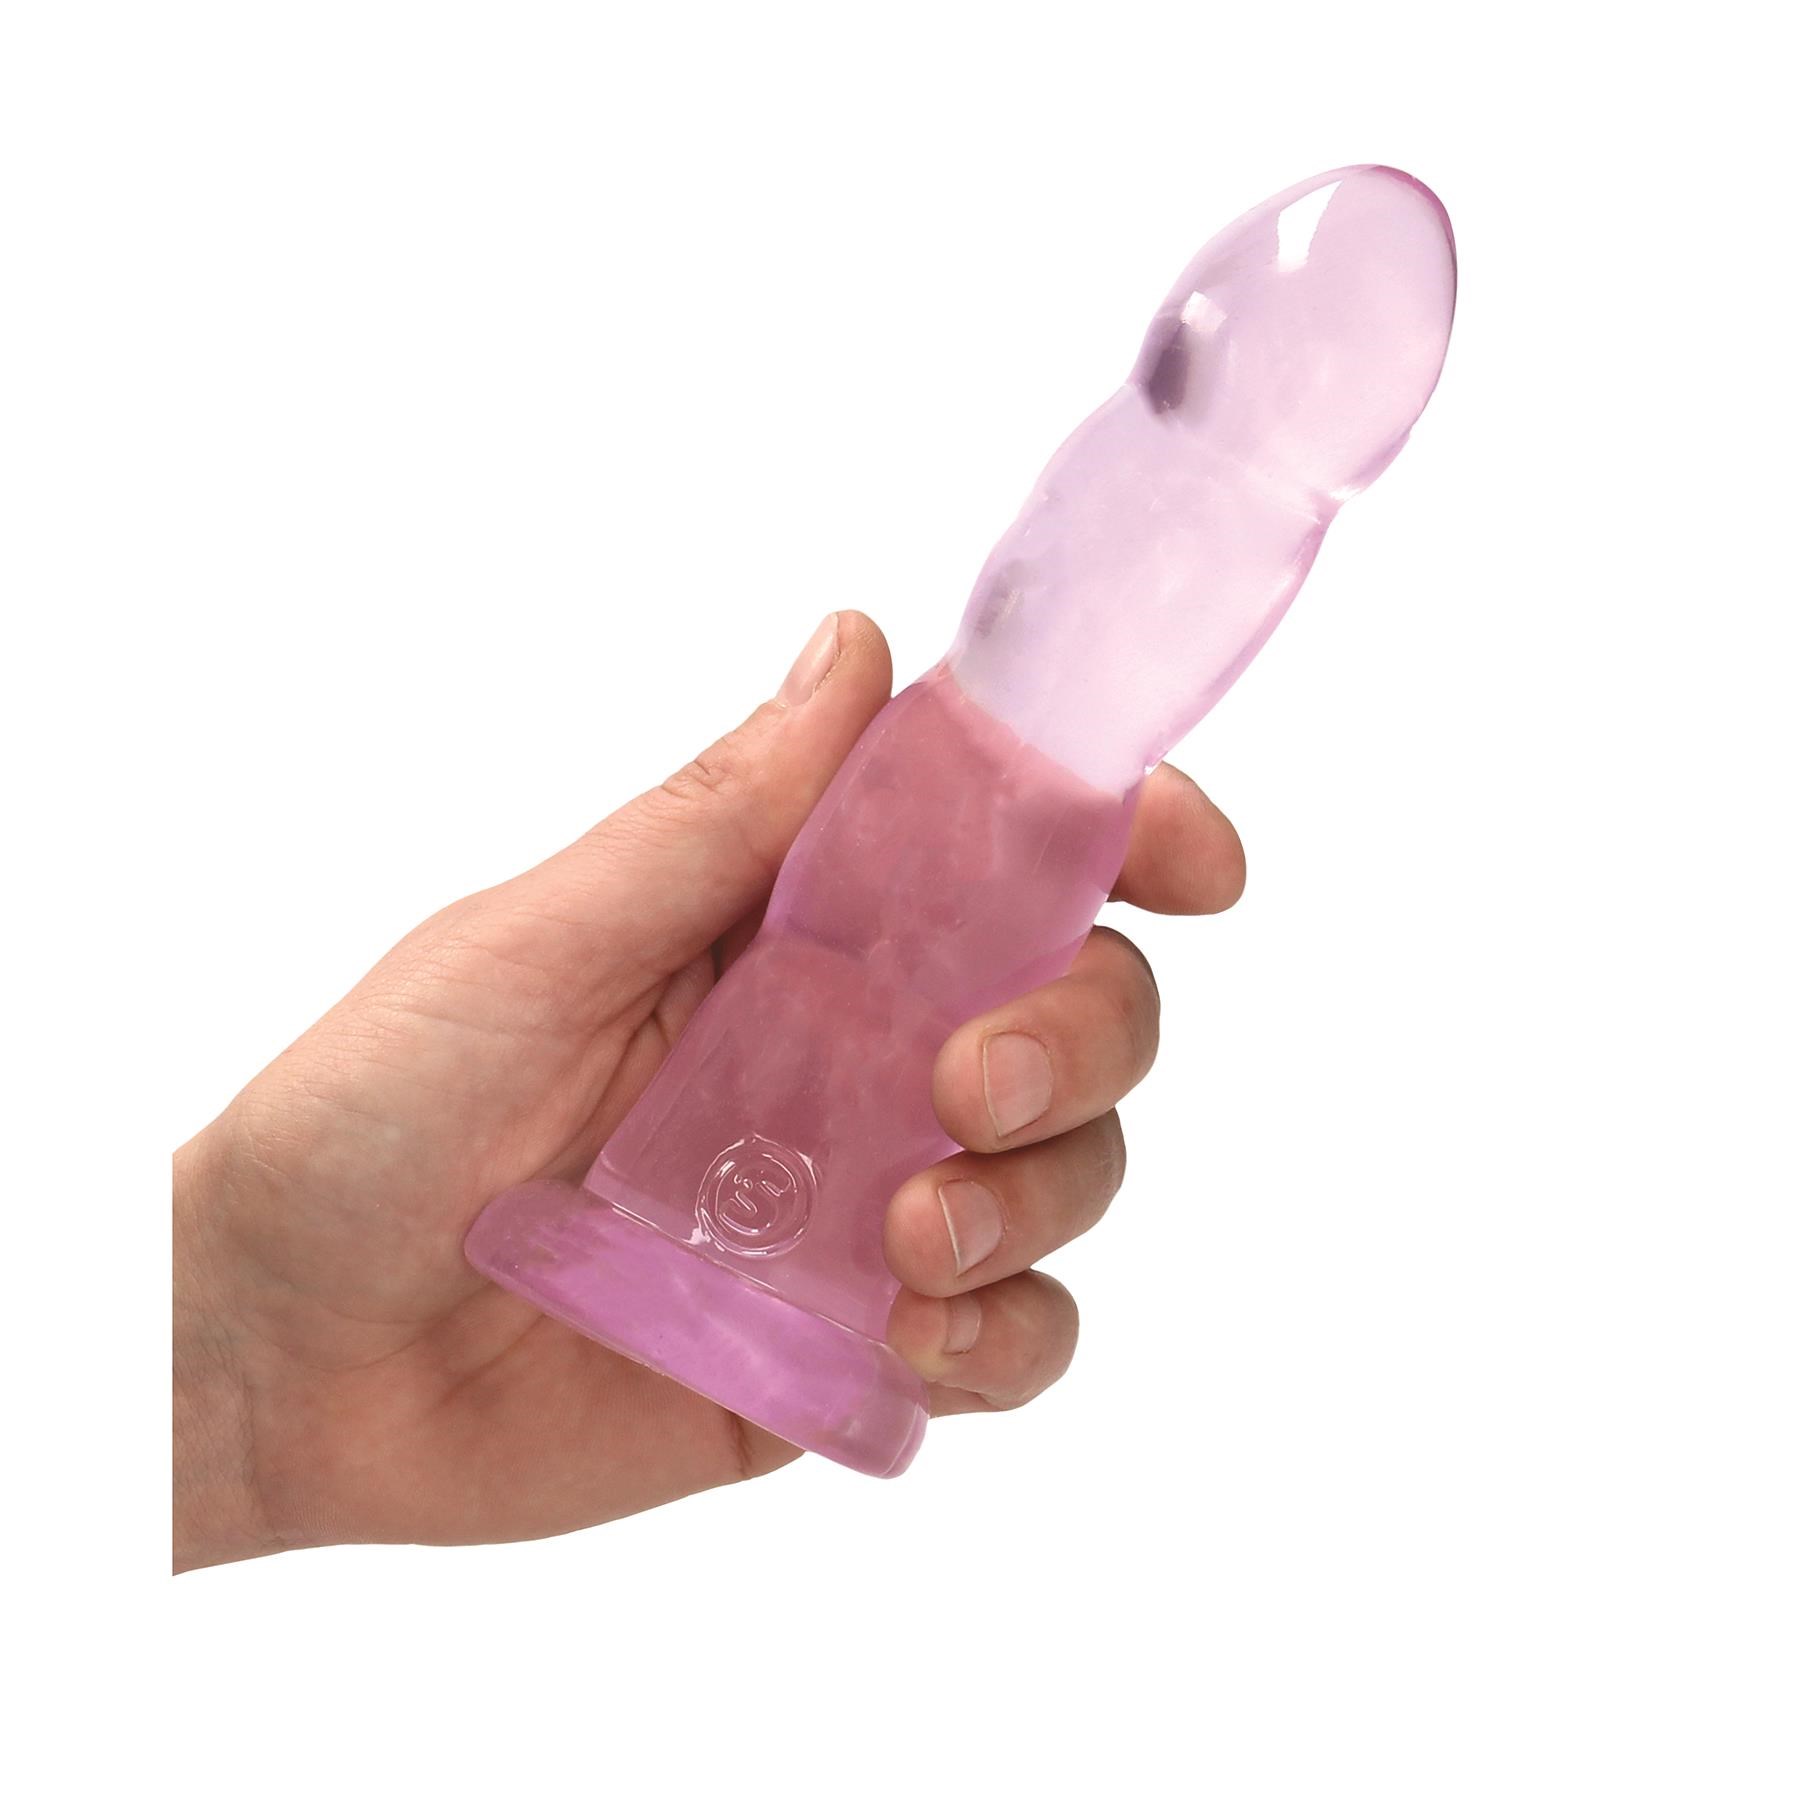 RealRock 7 Inch Suction Cup Dildo - Hand Shot to Show Size